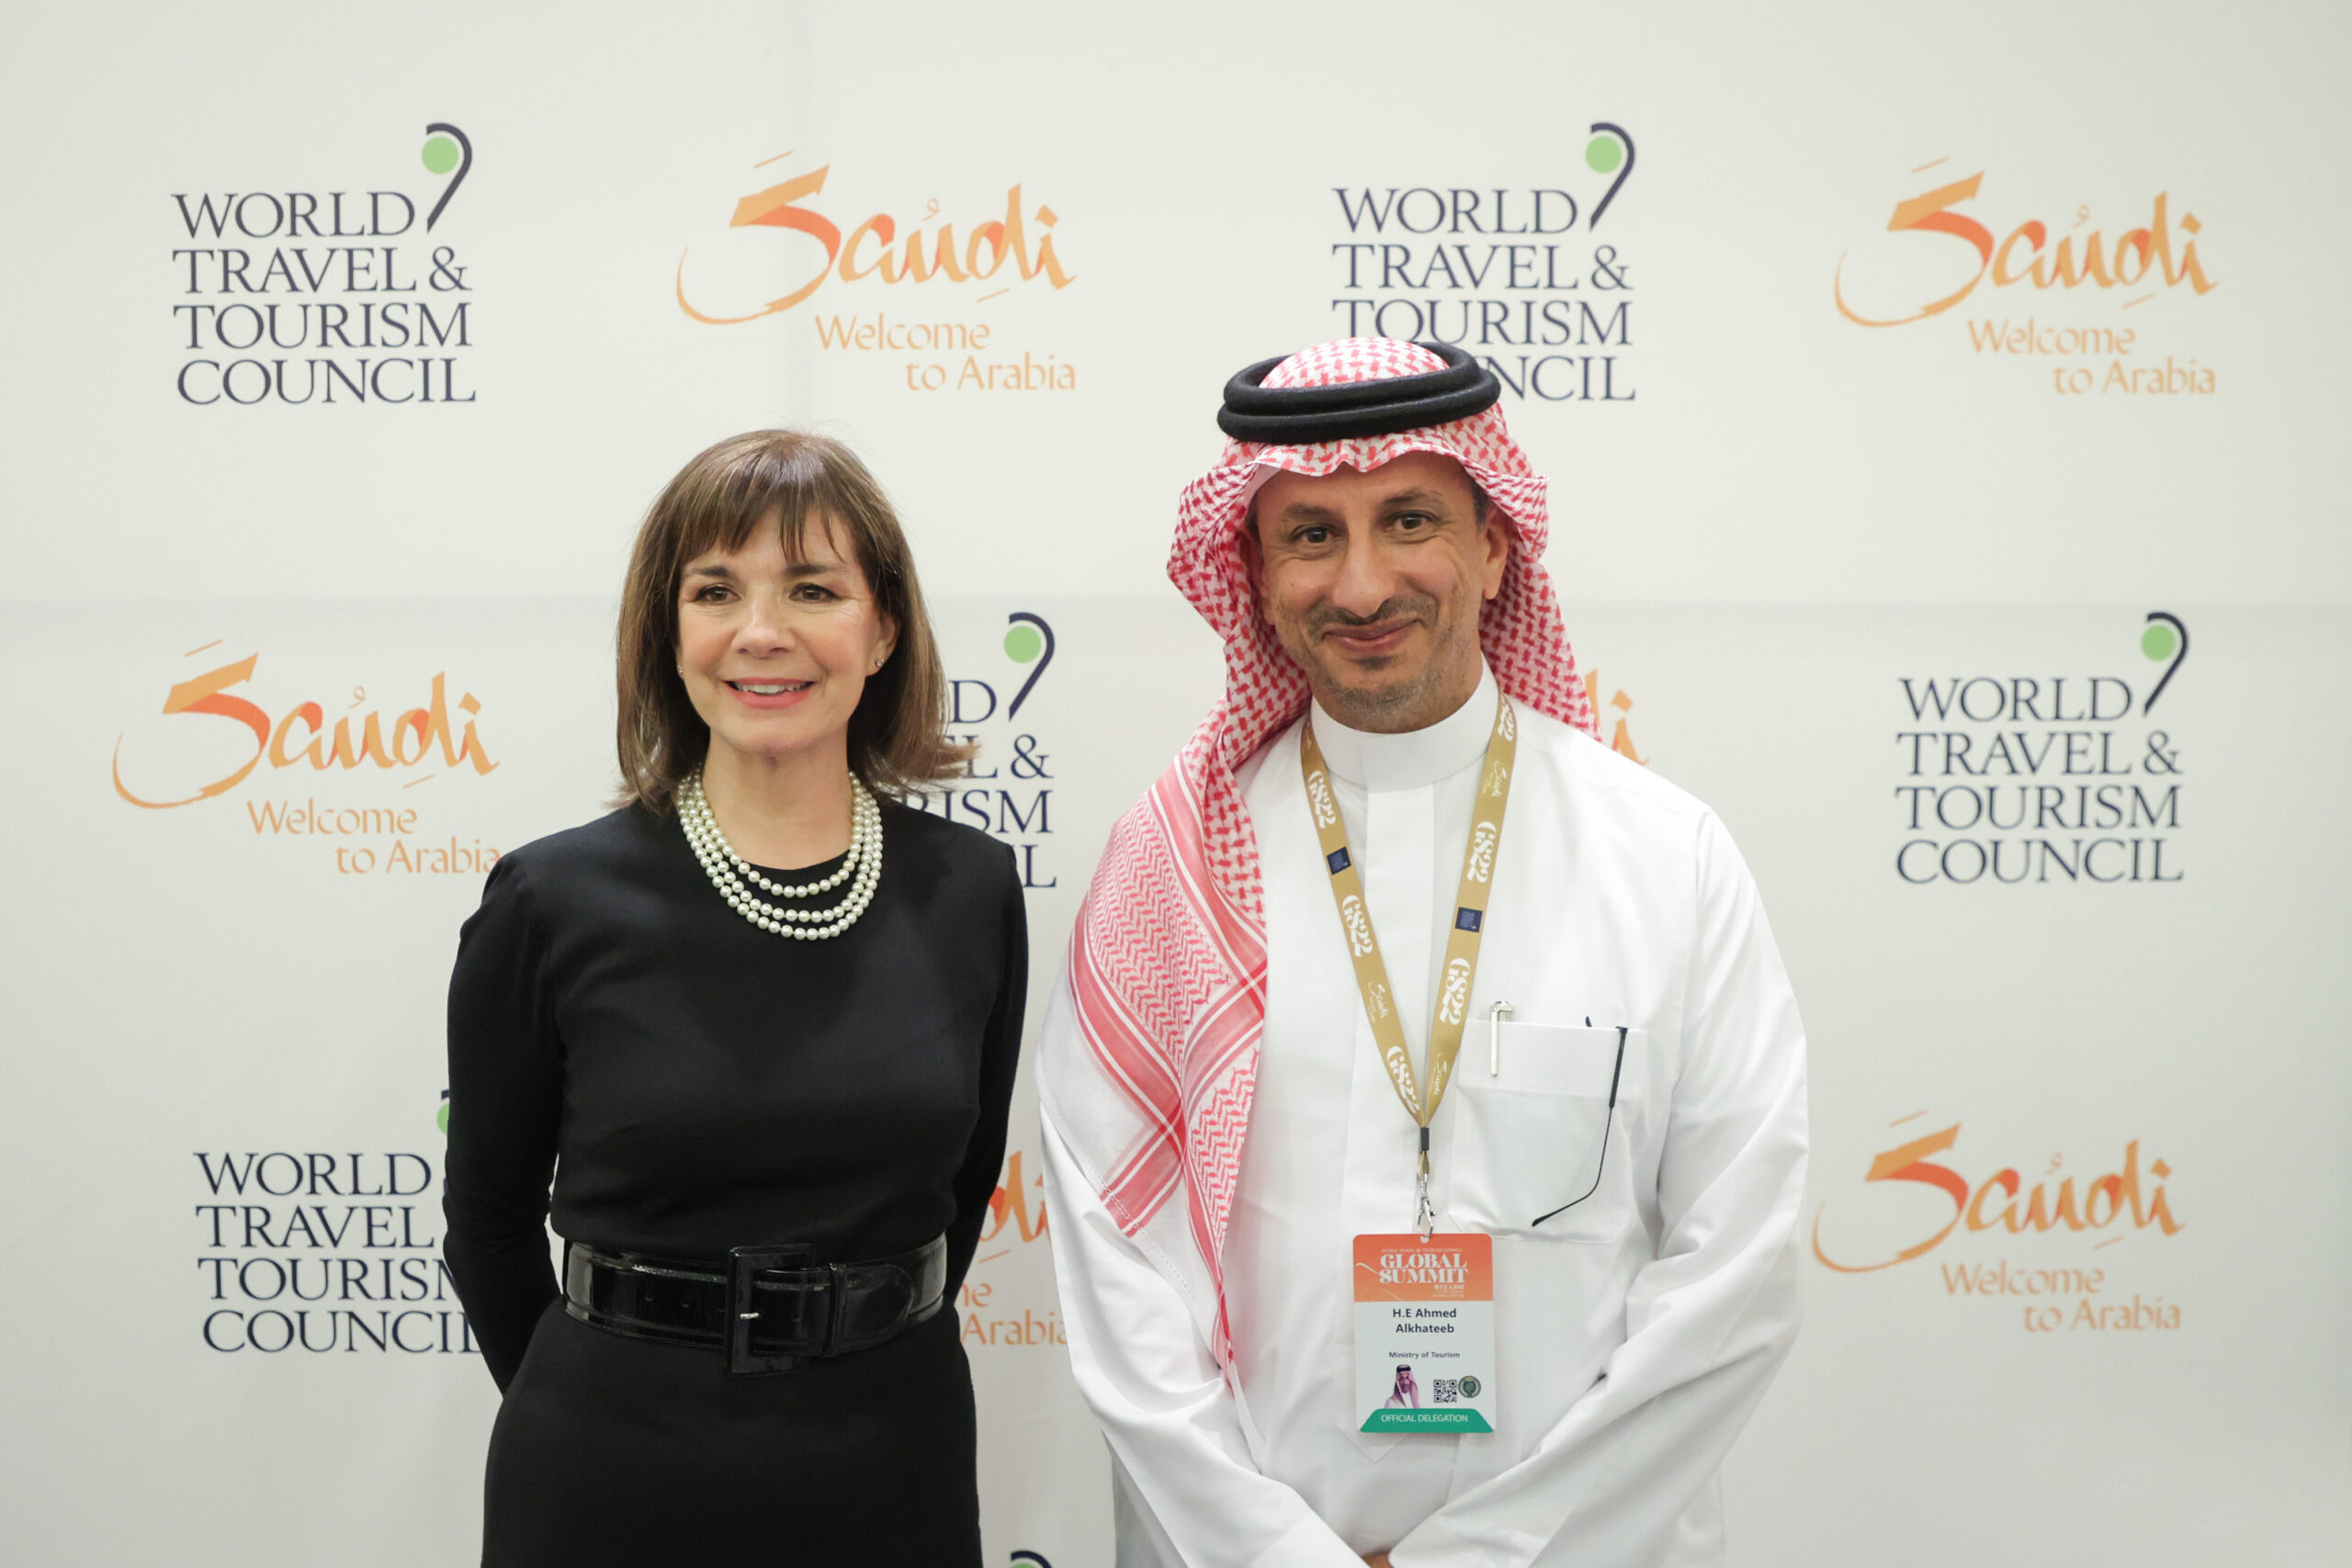 WTTC Members expected to invest more than USD 10bn in Saudi Arabia over 5 years